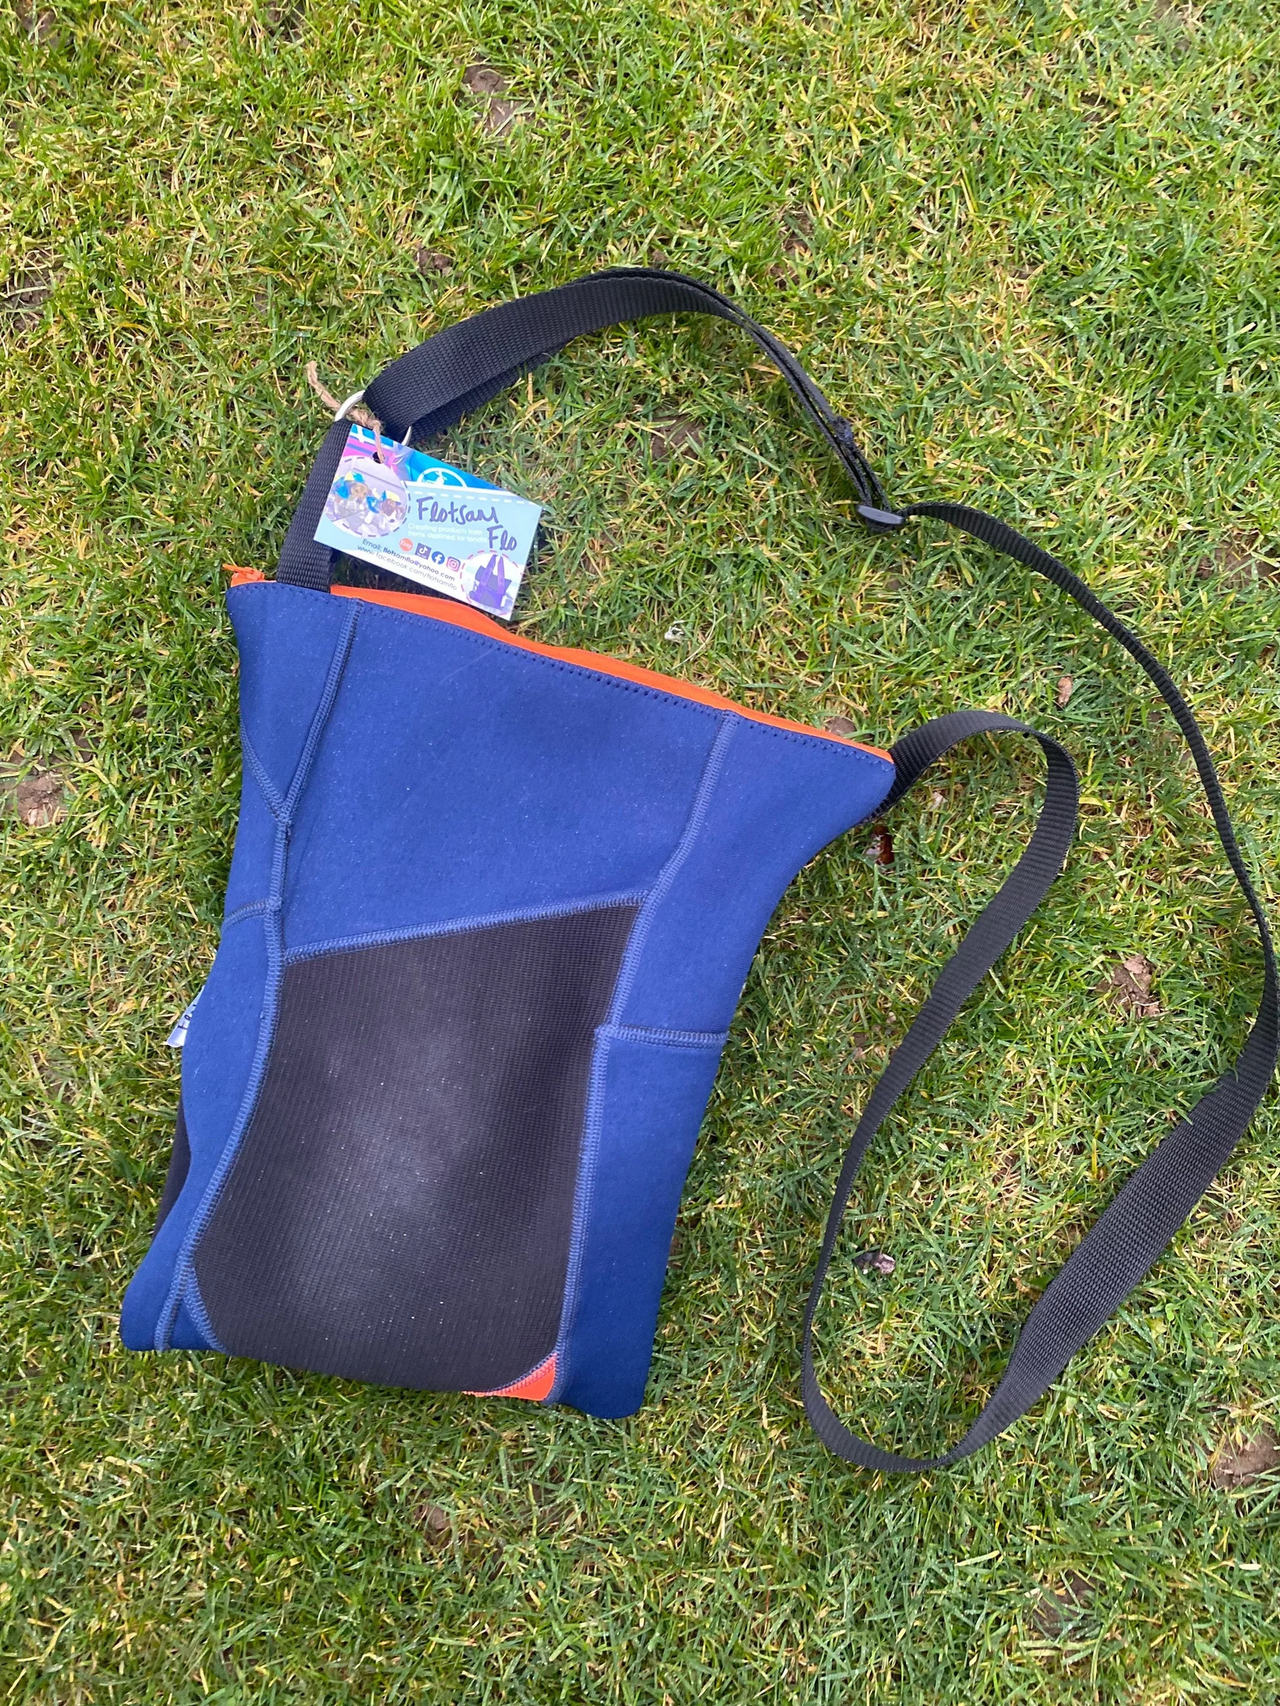 I’m slightly Wonky - I used to be a wetsuit - Blue and black recycled cross body bag - Handmade and upcycled